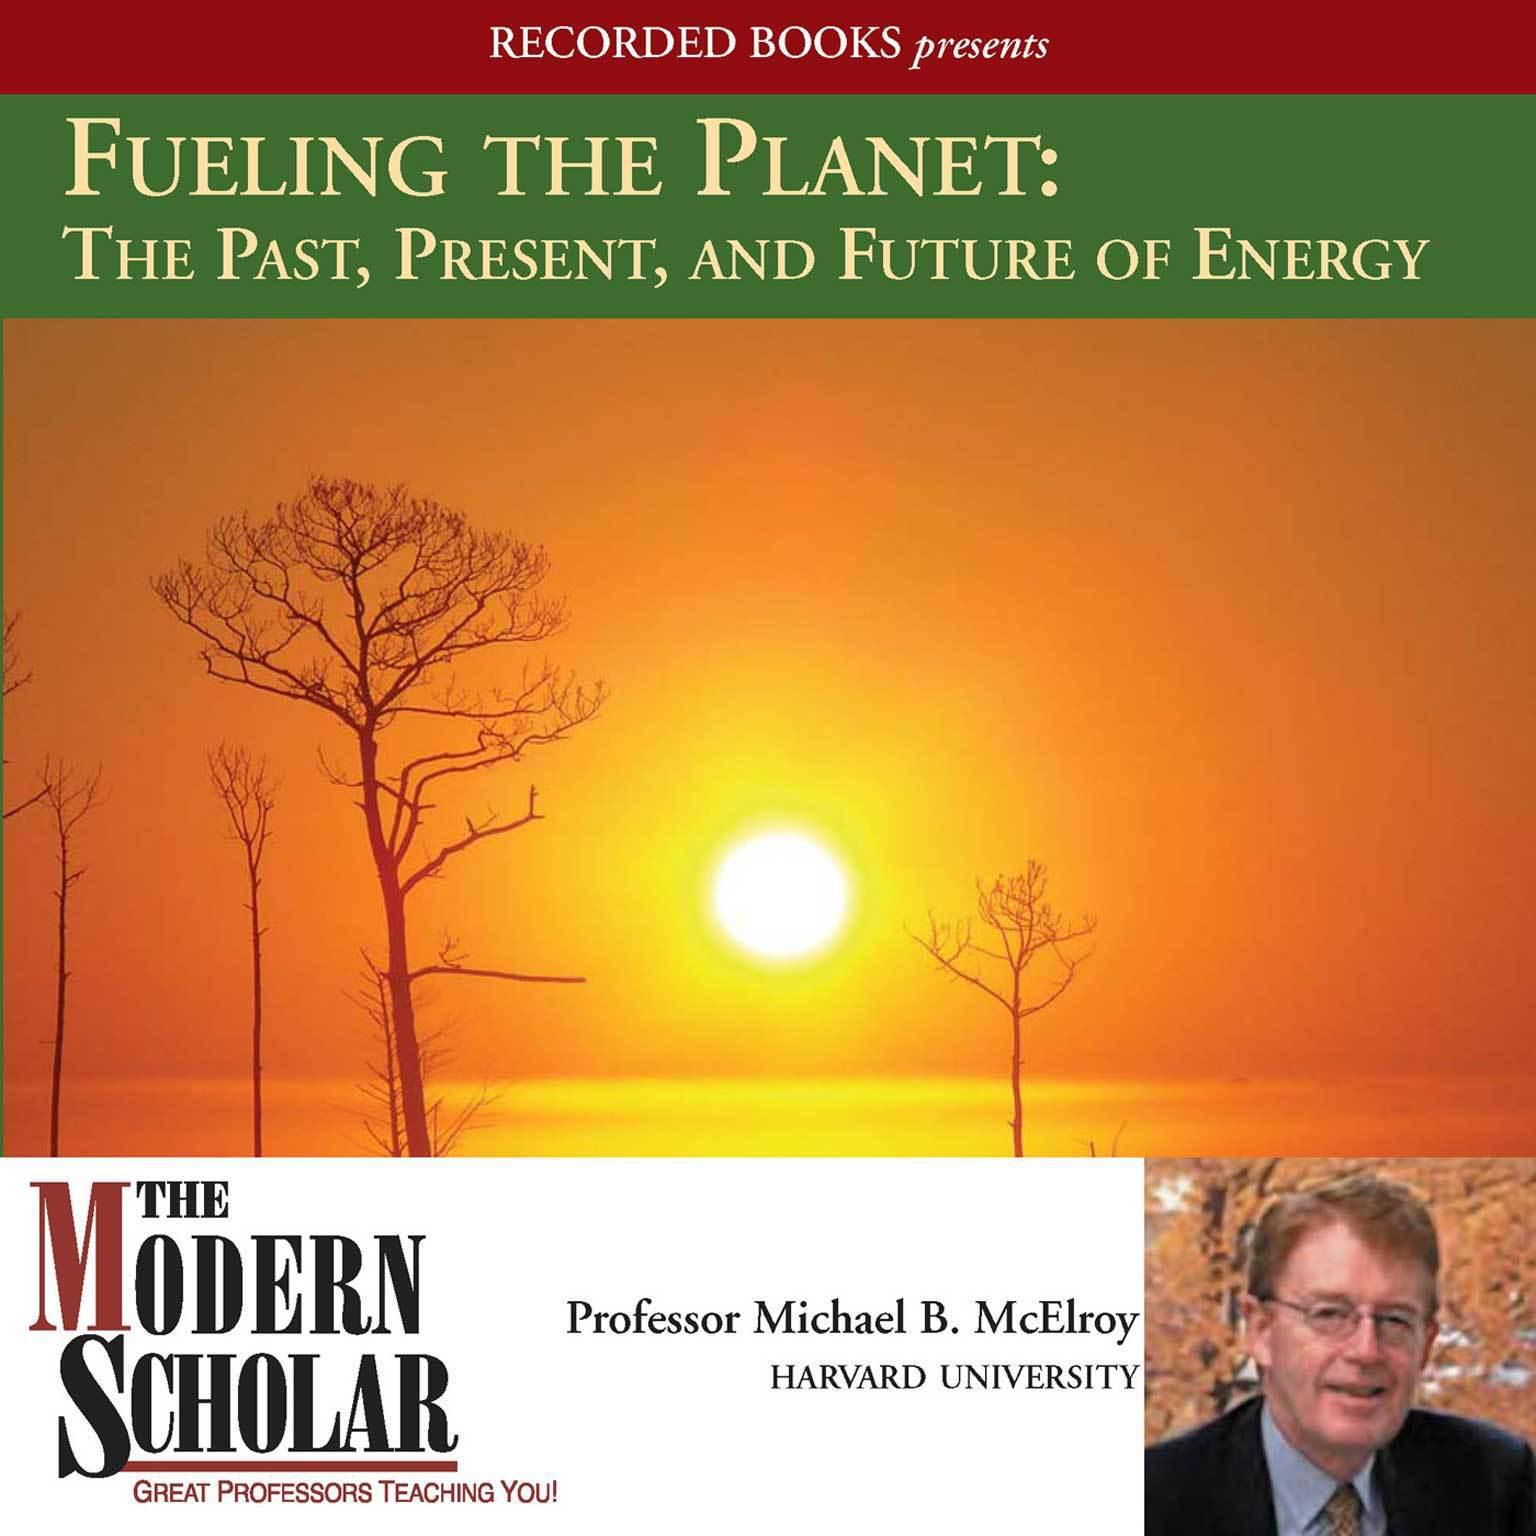 Fueling the Planet: The Past, Present, and Future of Energy: The Past, Present, and Future of Energy Audiobook, by Michael McElroy